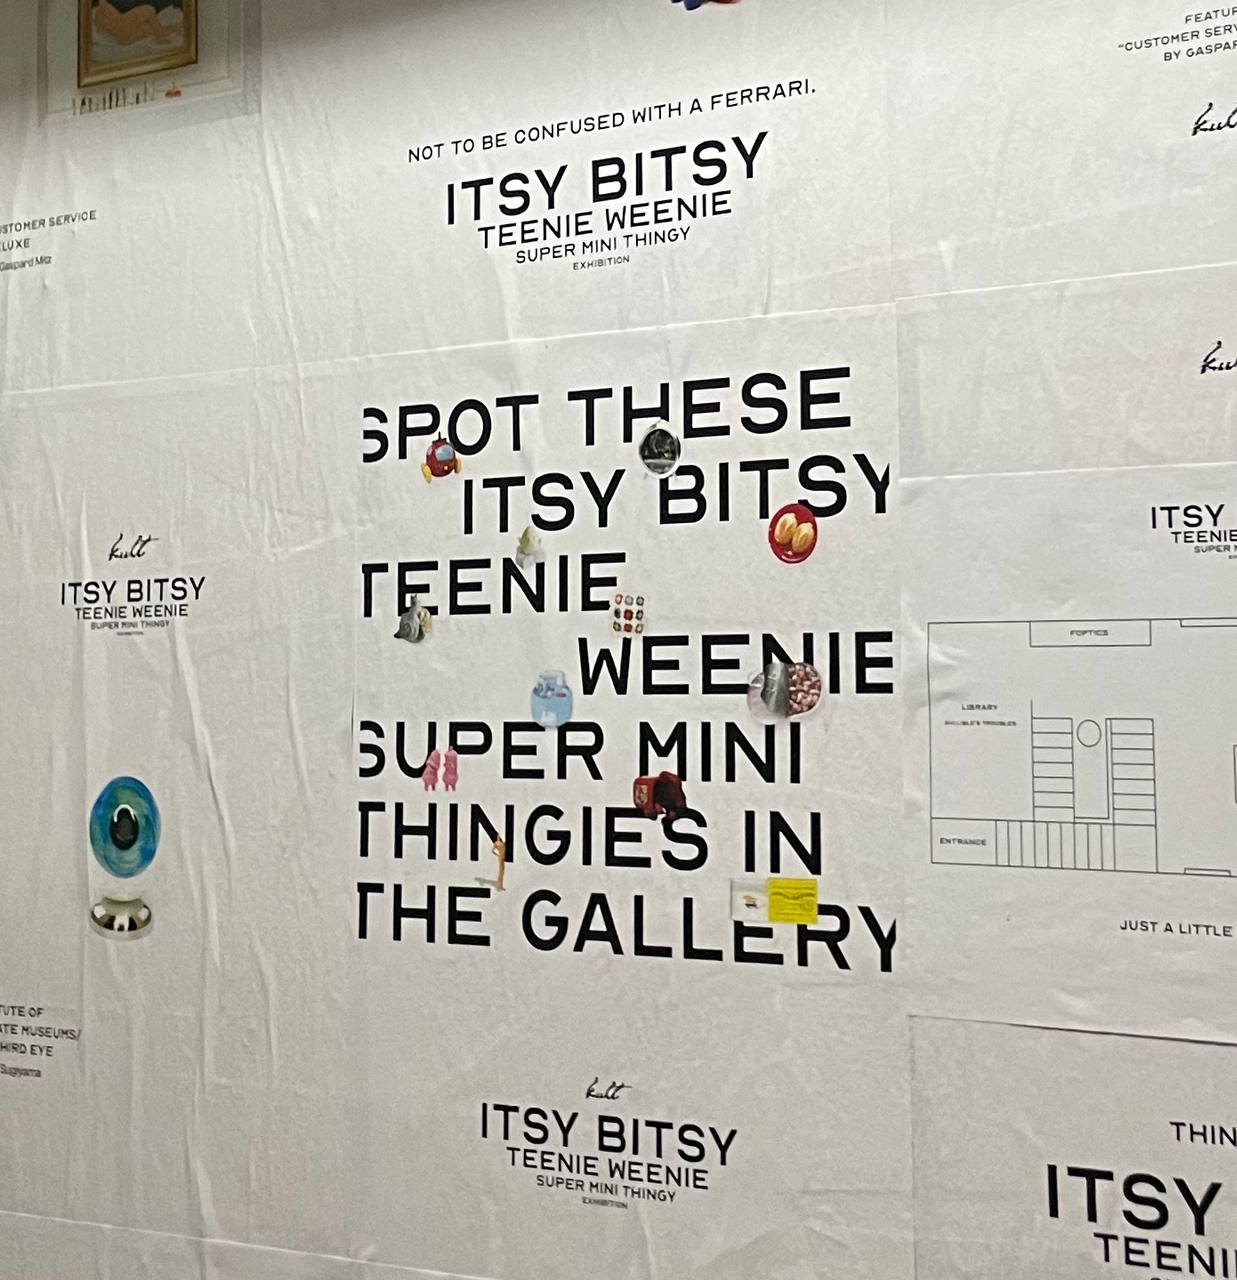 This photo shows a poster located at the entrance of the Itsy Bitsy Exhibition. The text says Spot These Itsy Bitsy Teeny Weenie Super Mini Thingies in the Gallery.